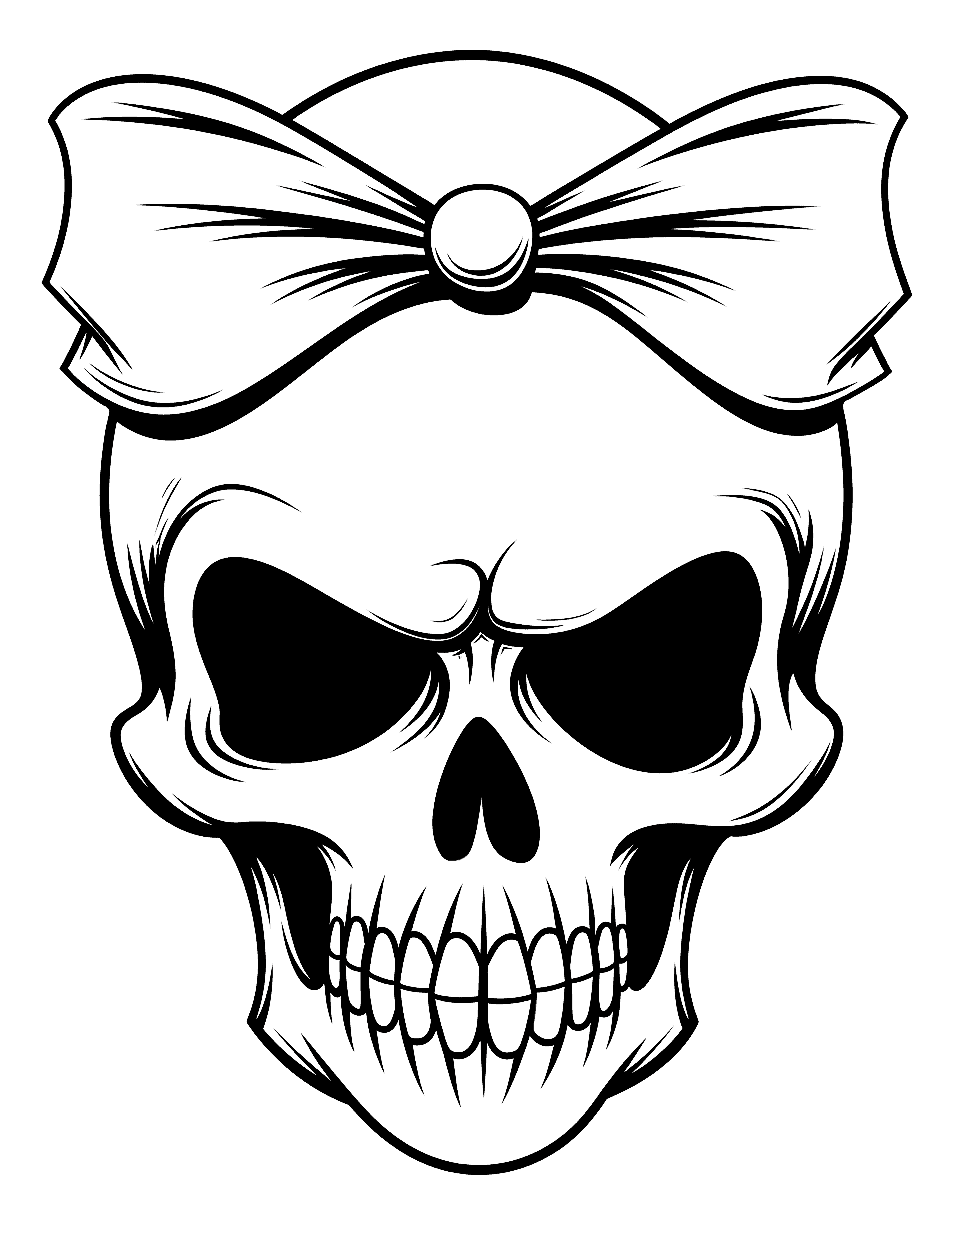 Cute Skull with Bow Coloring Page - A charming skull adorned with a cute bow on top.